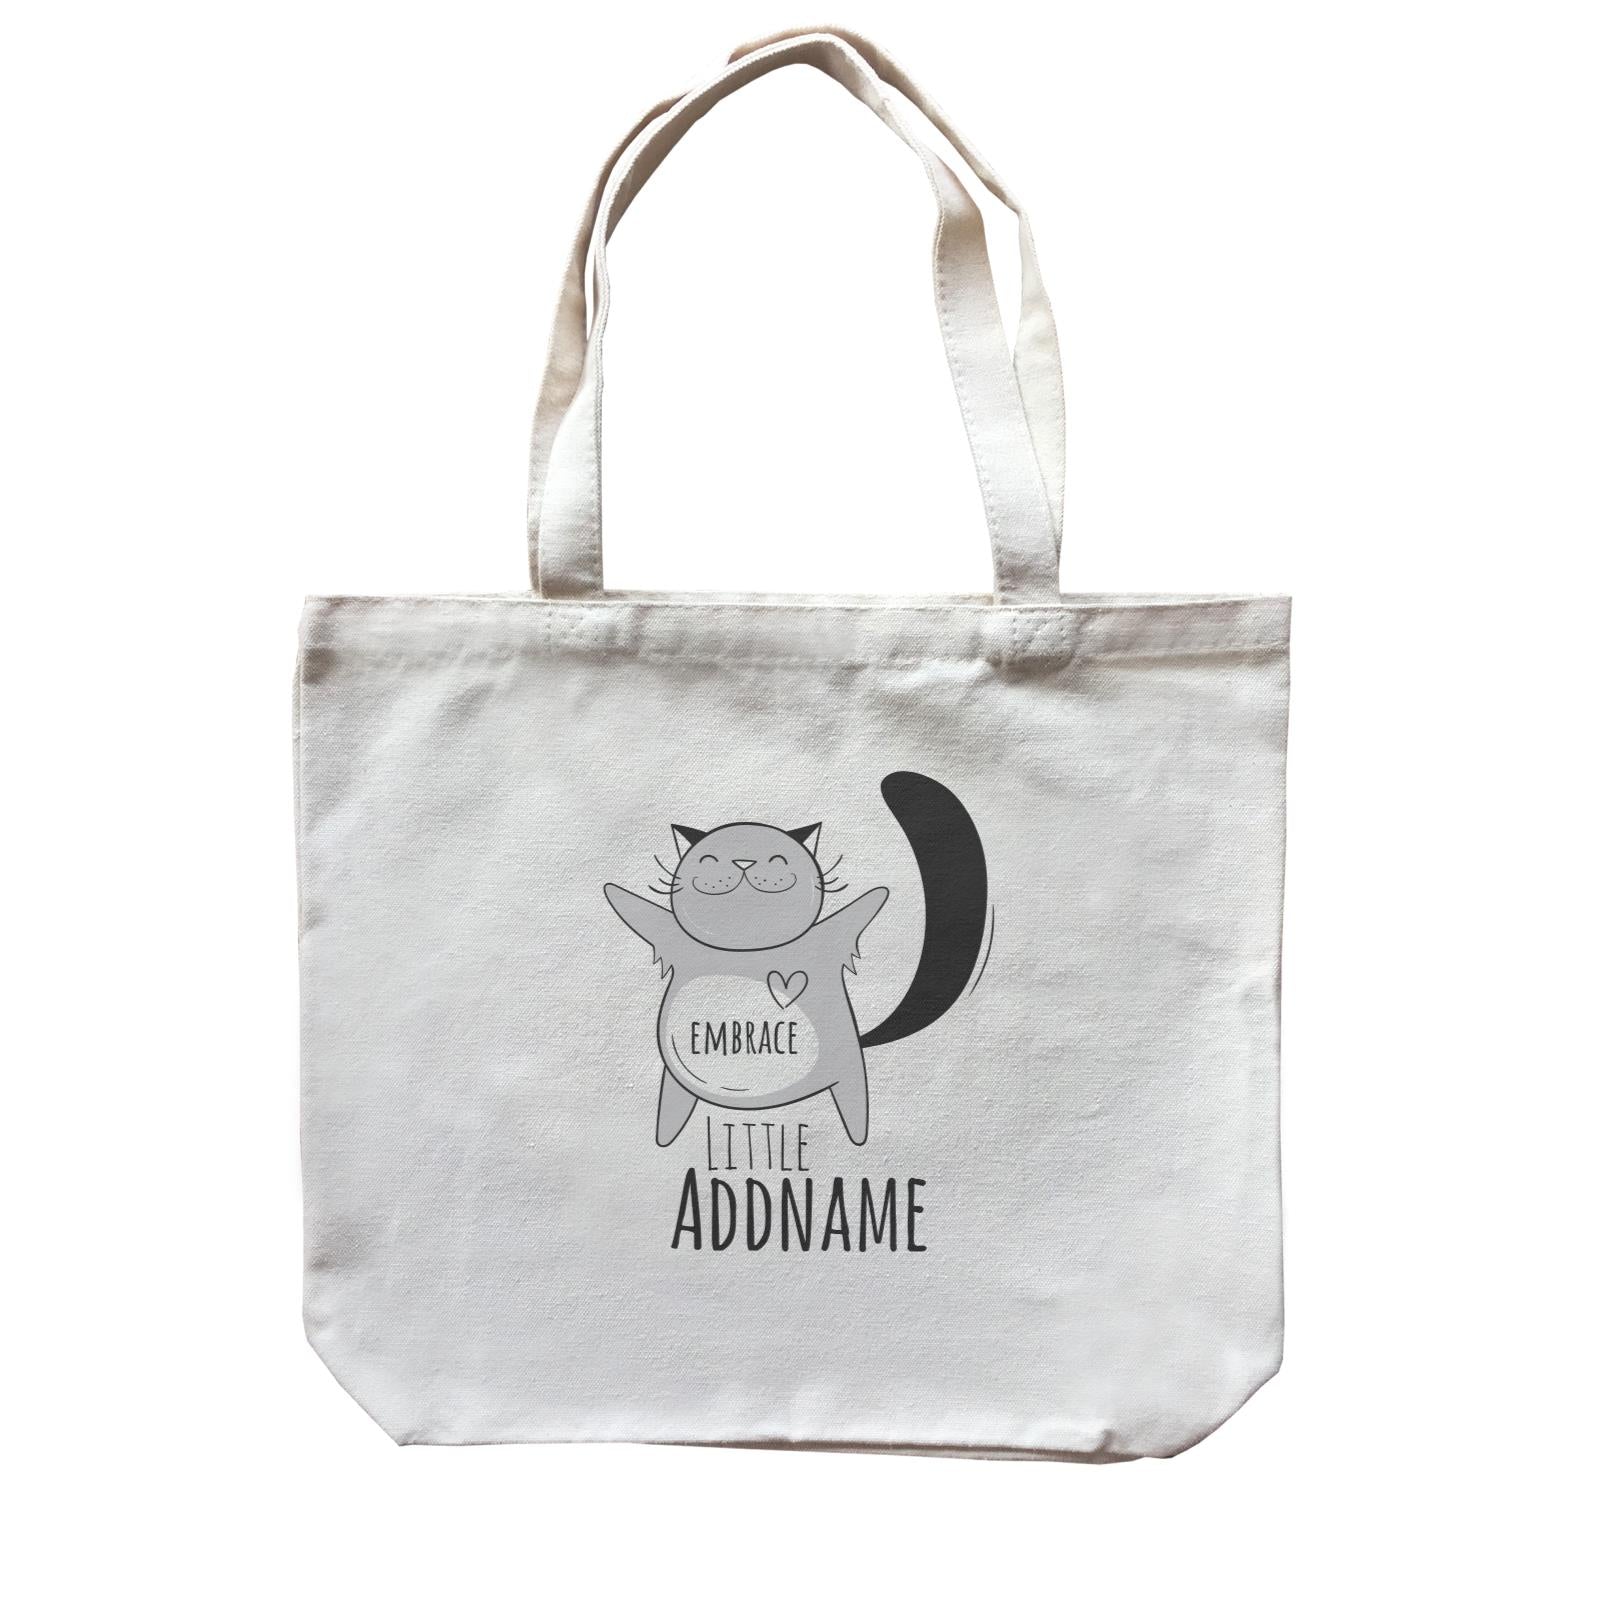 Drawn Adorable Animals Embrace Addname Canvas Bag